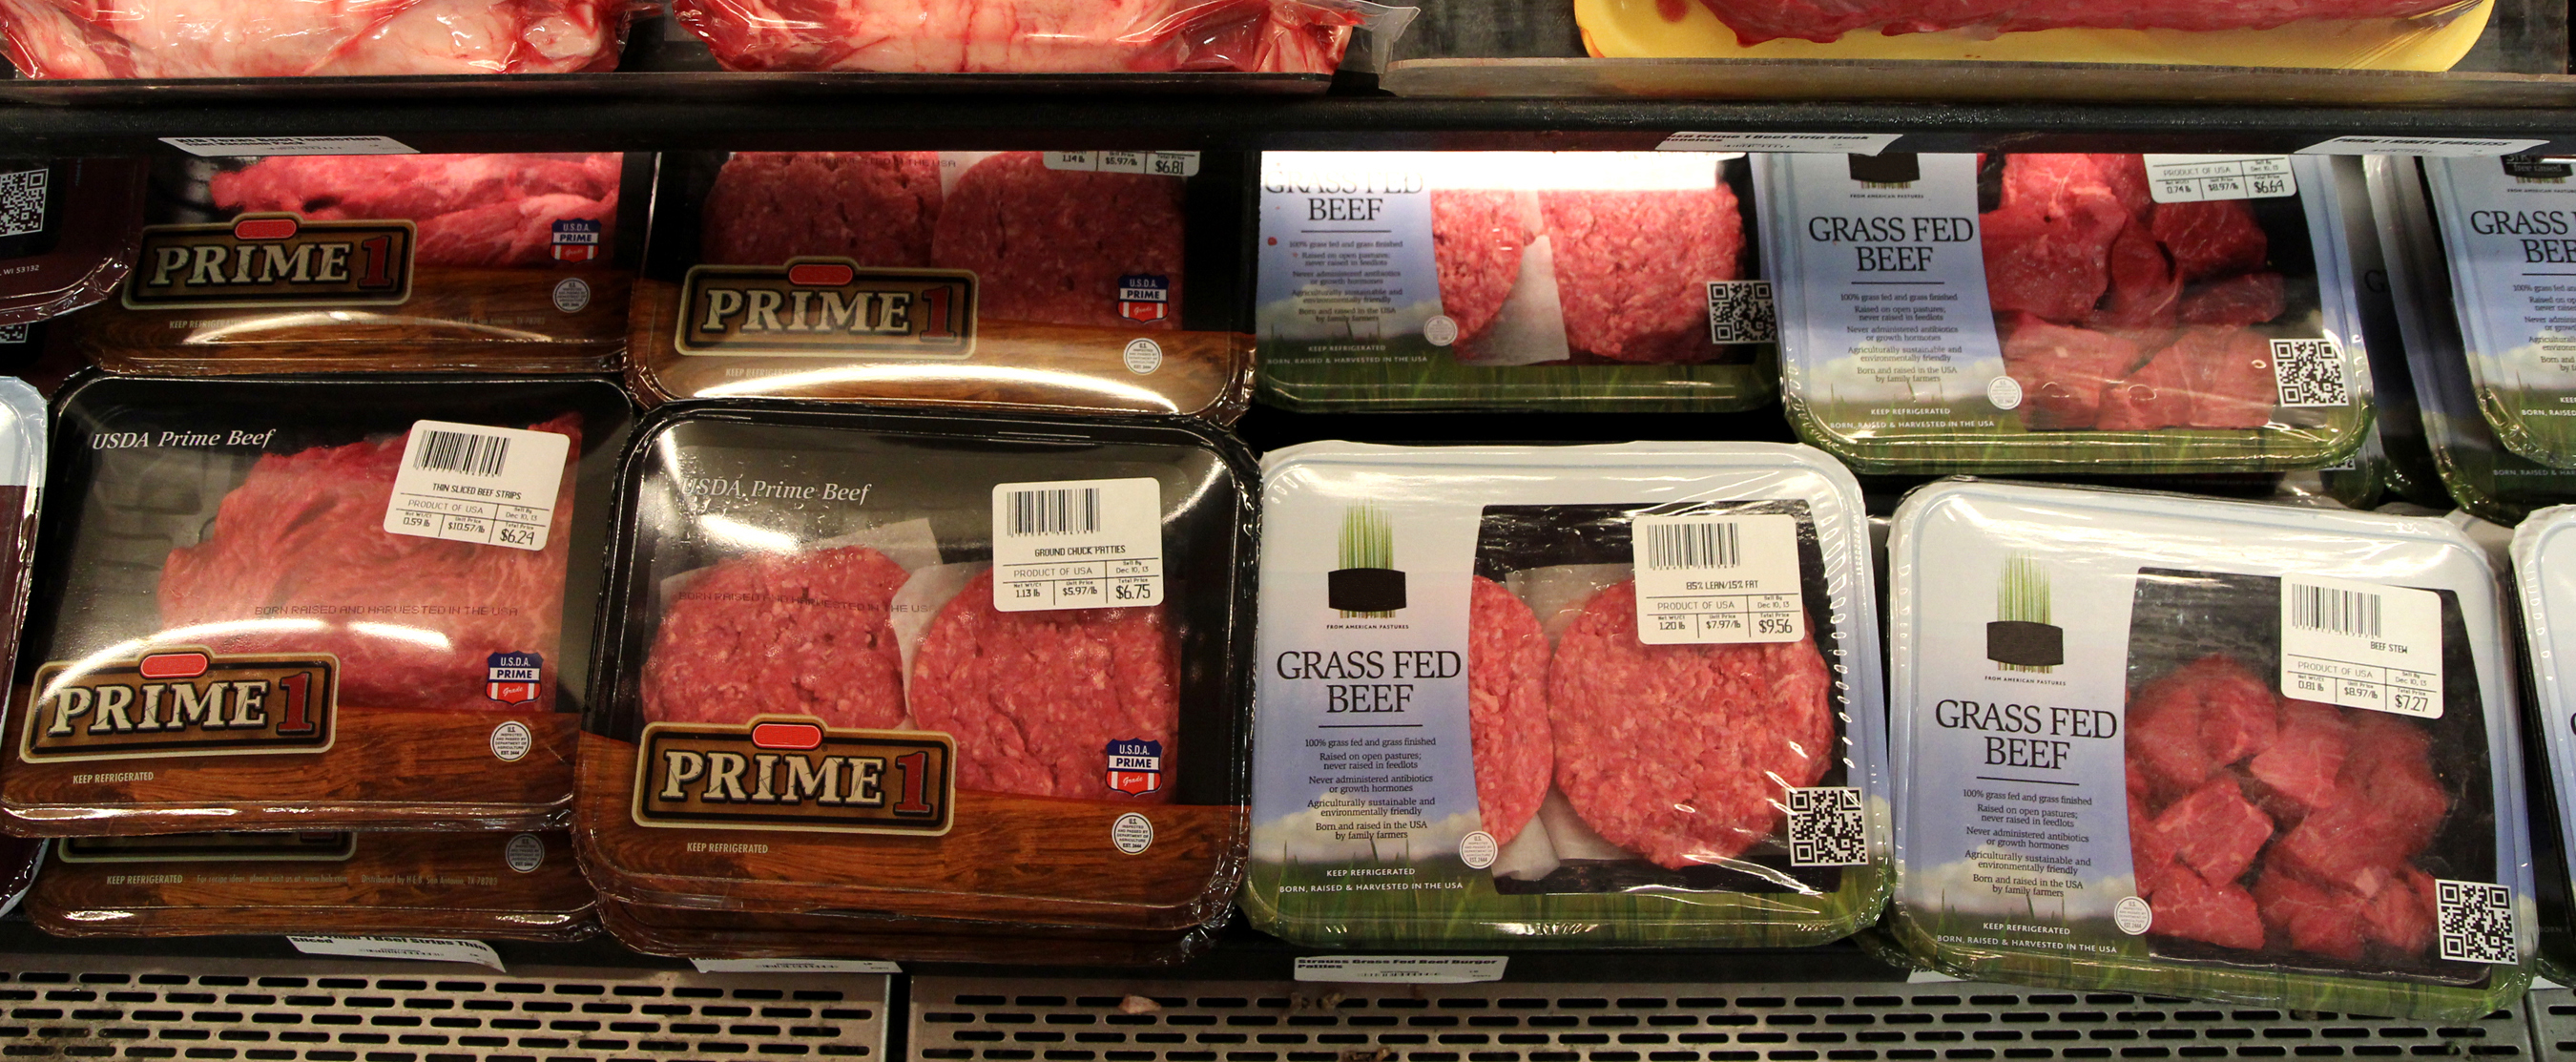 Grass-Fed Beef Products - The Butcher Shoppe